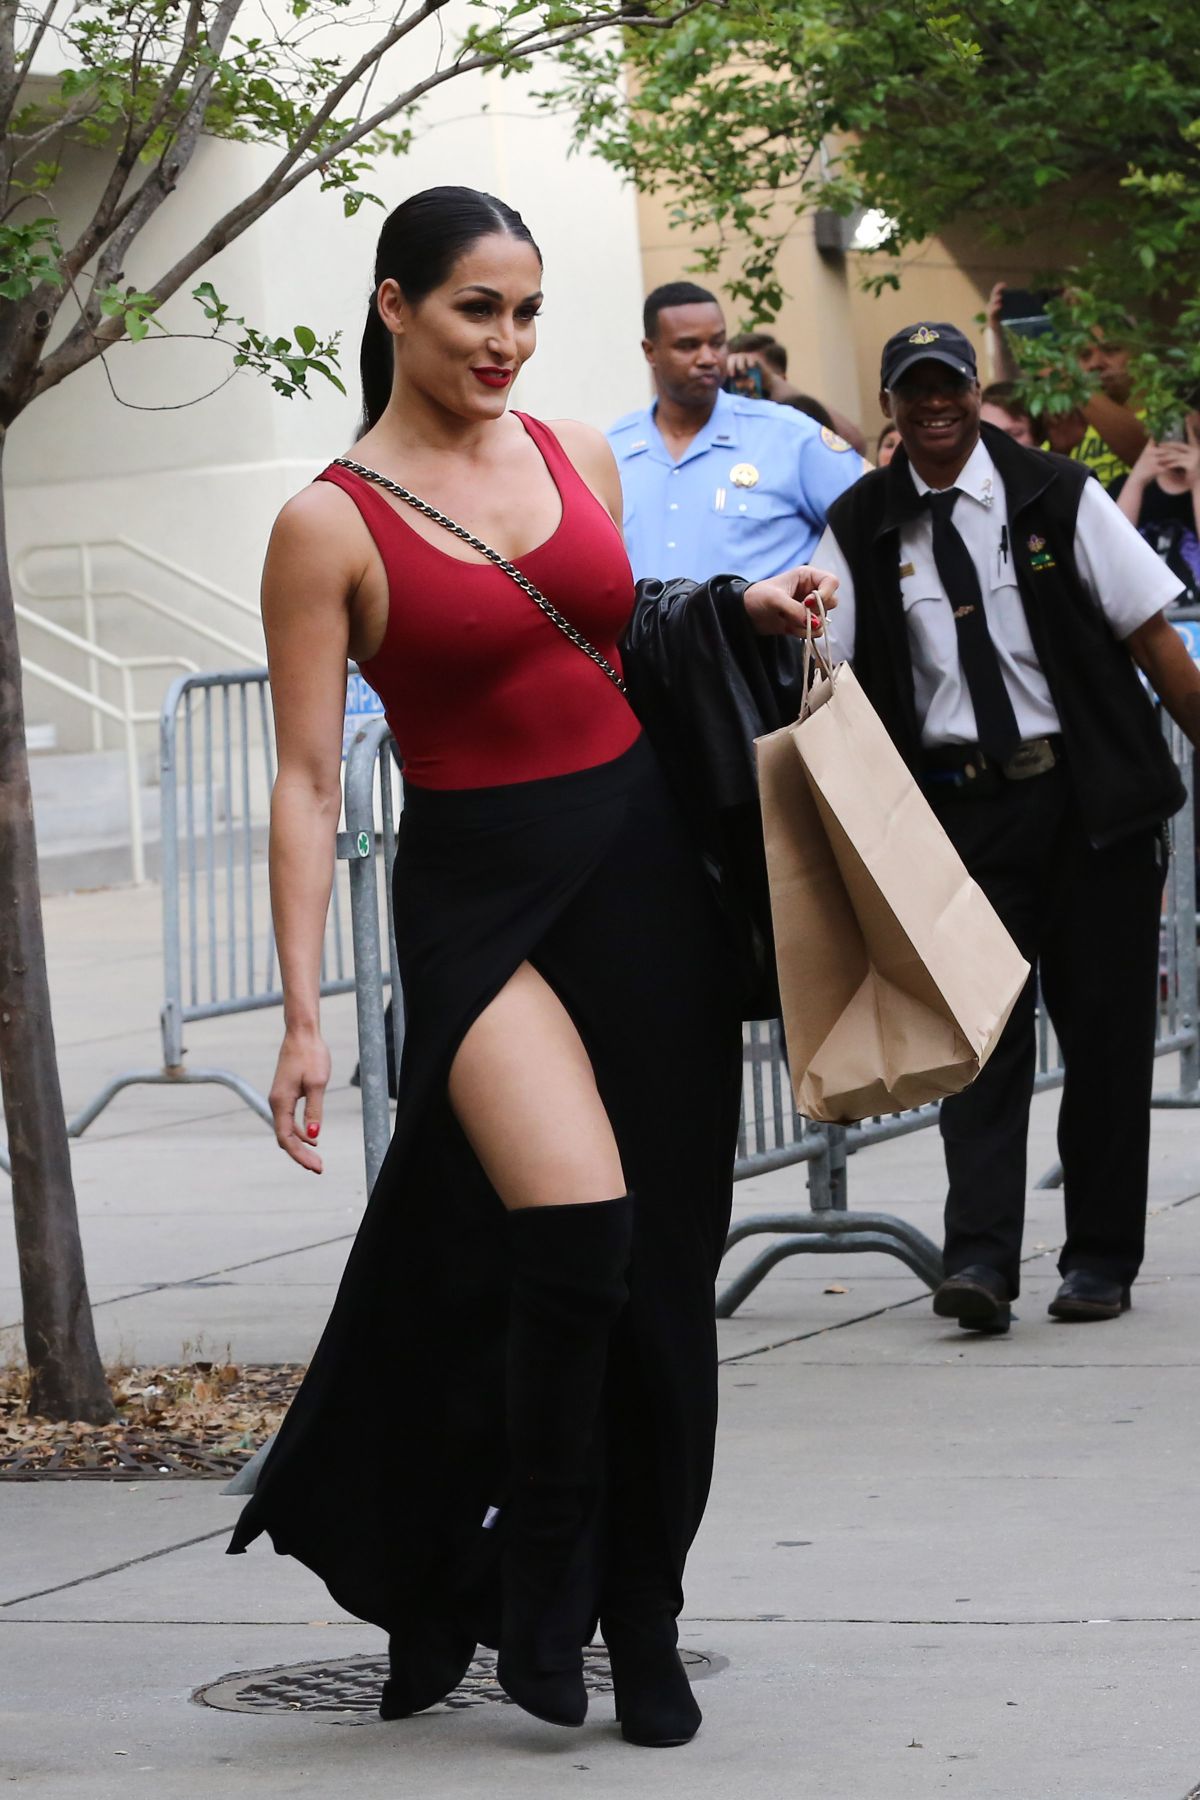 NIKKI BELLA at WWE Wrestlemania 34 Hall Of Fame 2018 in New Orleans 04/06/2018 ...